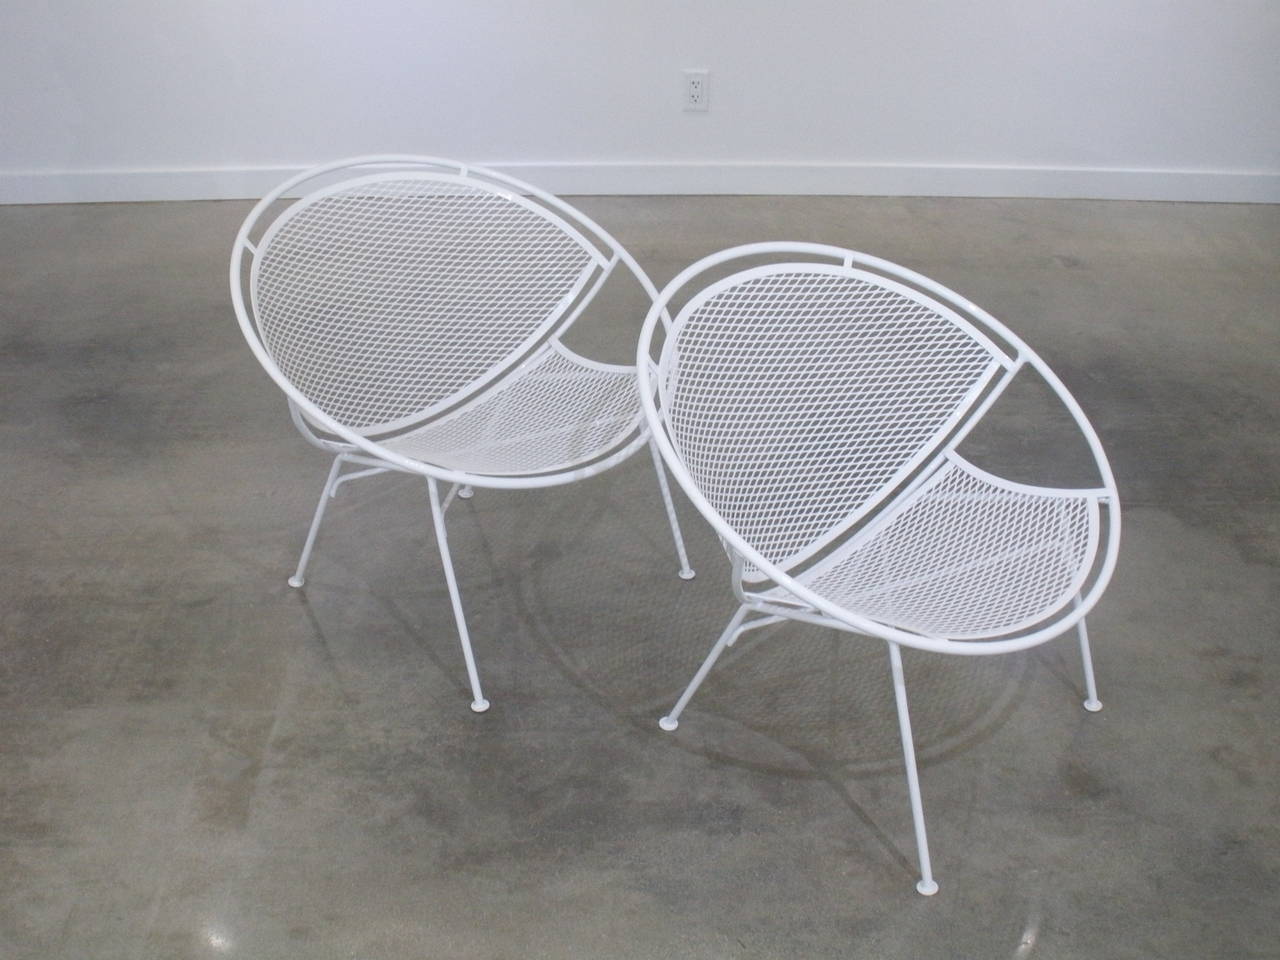 Pair of Maurizio Tempestini for Salterini radar hoop chairs recently powder coated.
Please feel free to contact us directly for a shipping quote, or other questions and information including making an offer by clicking 